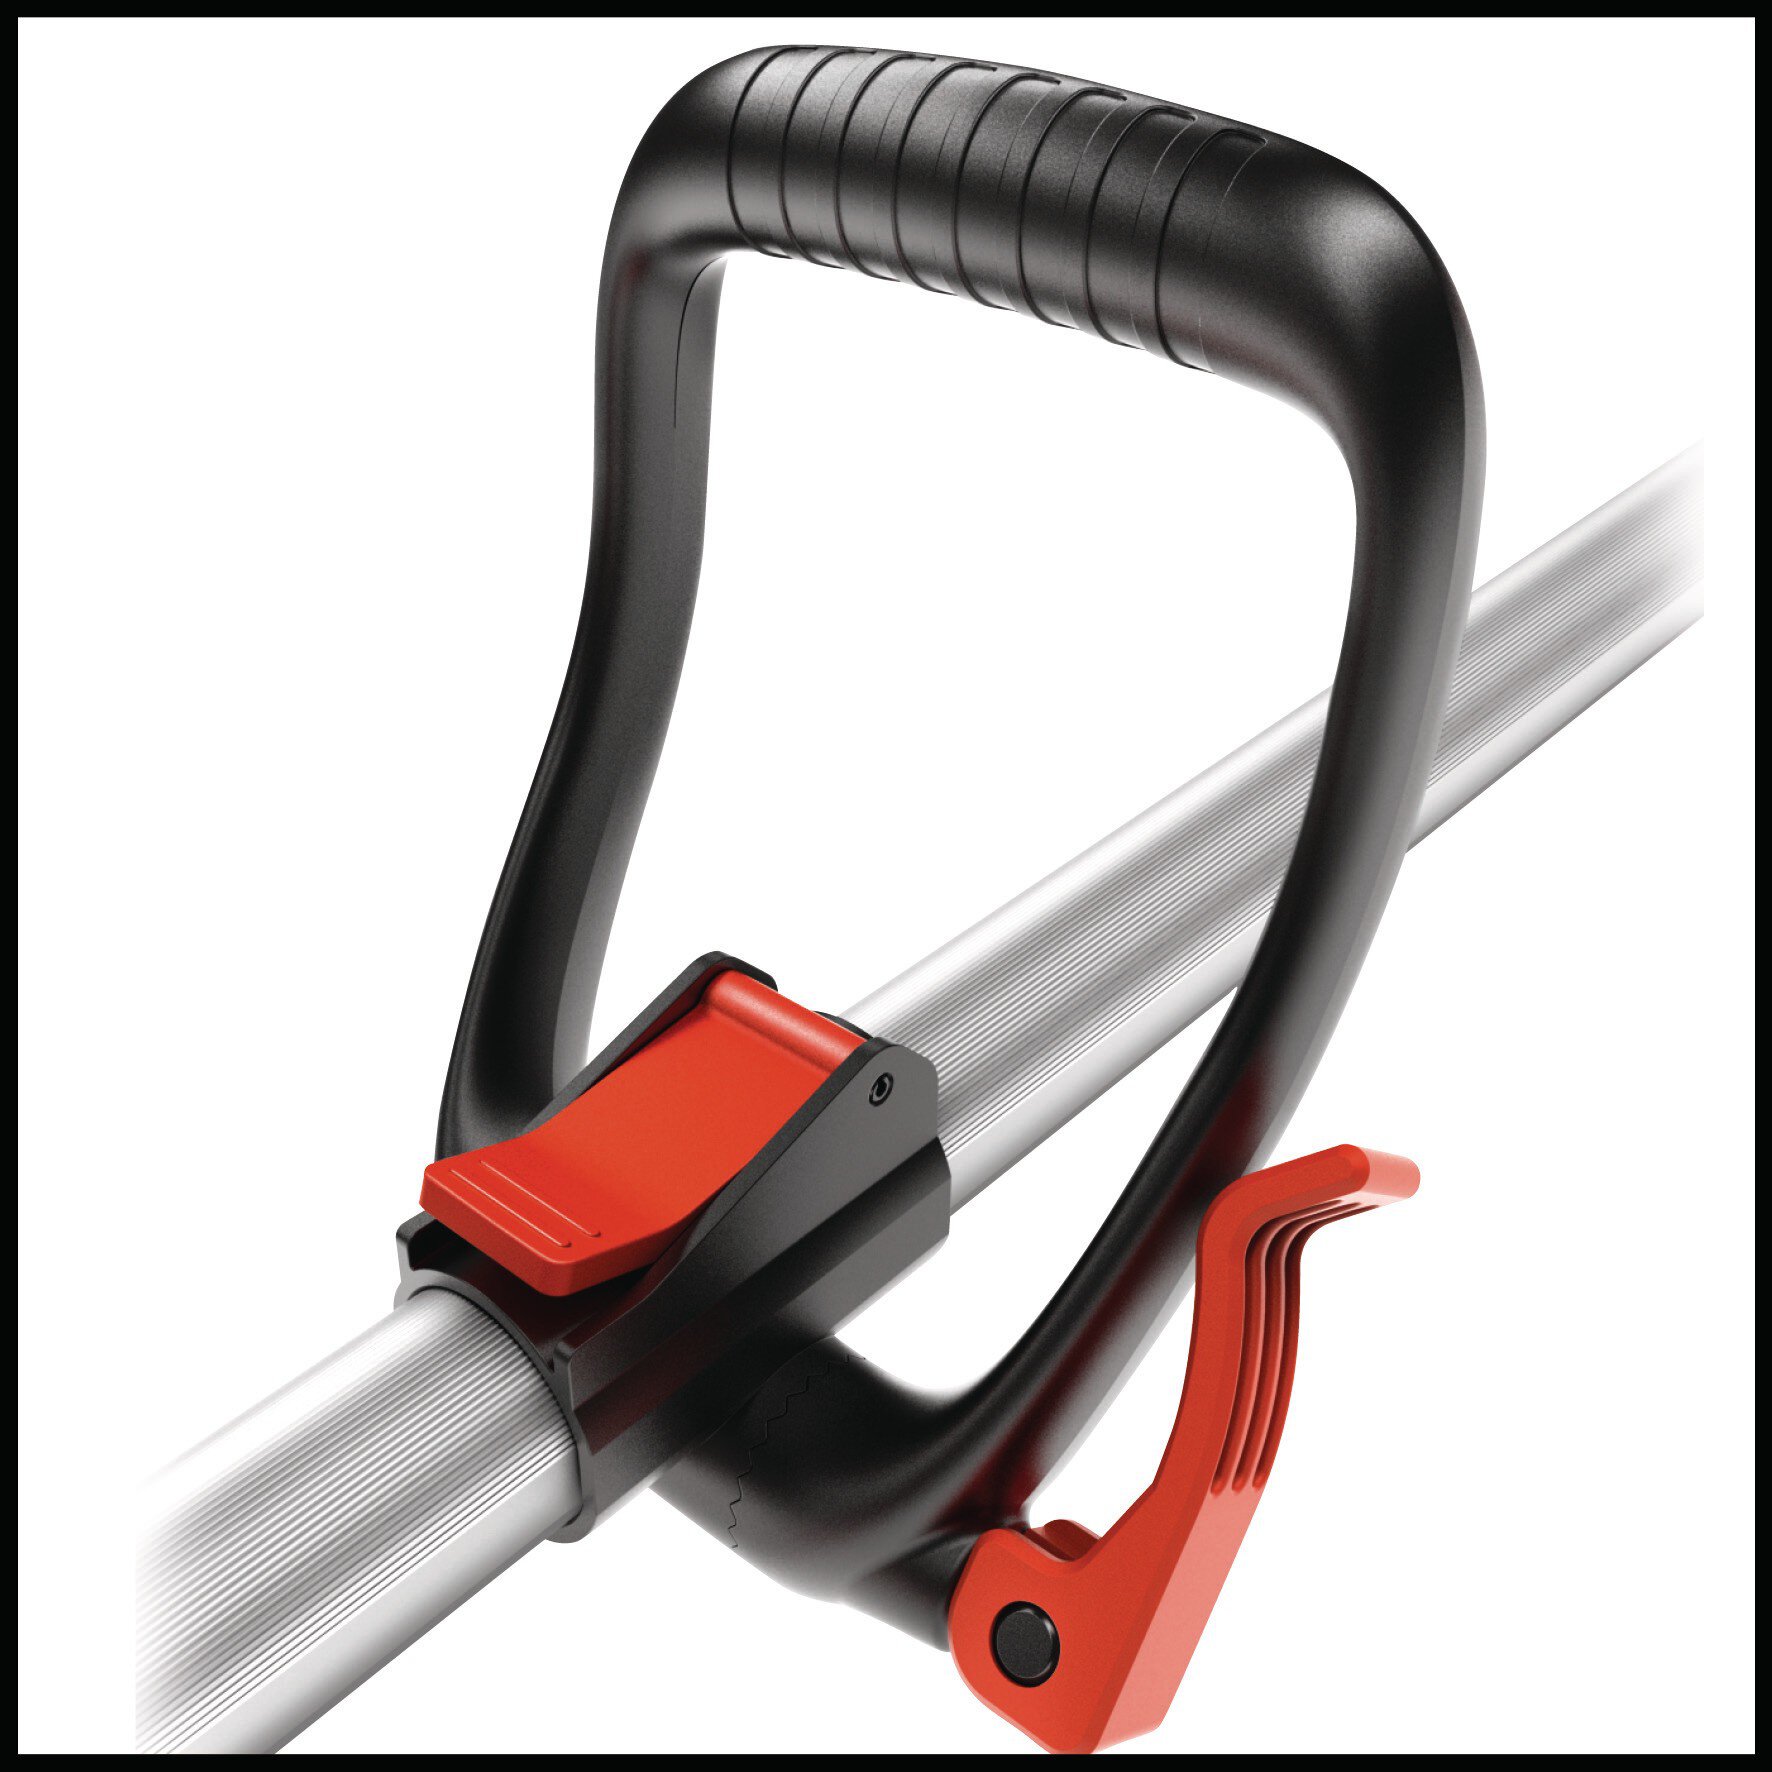 einhell-expert-cl-telescopic-hedge-trimmer-3410866-detail_image-004